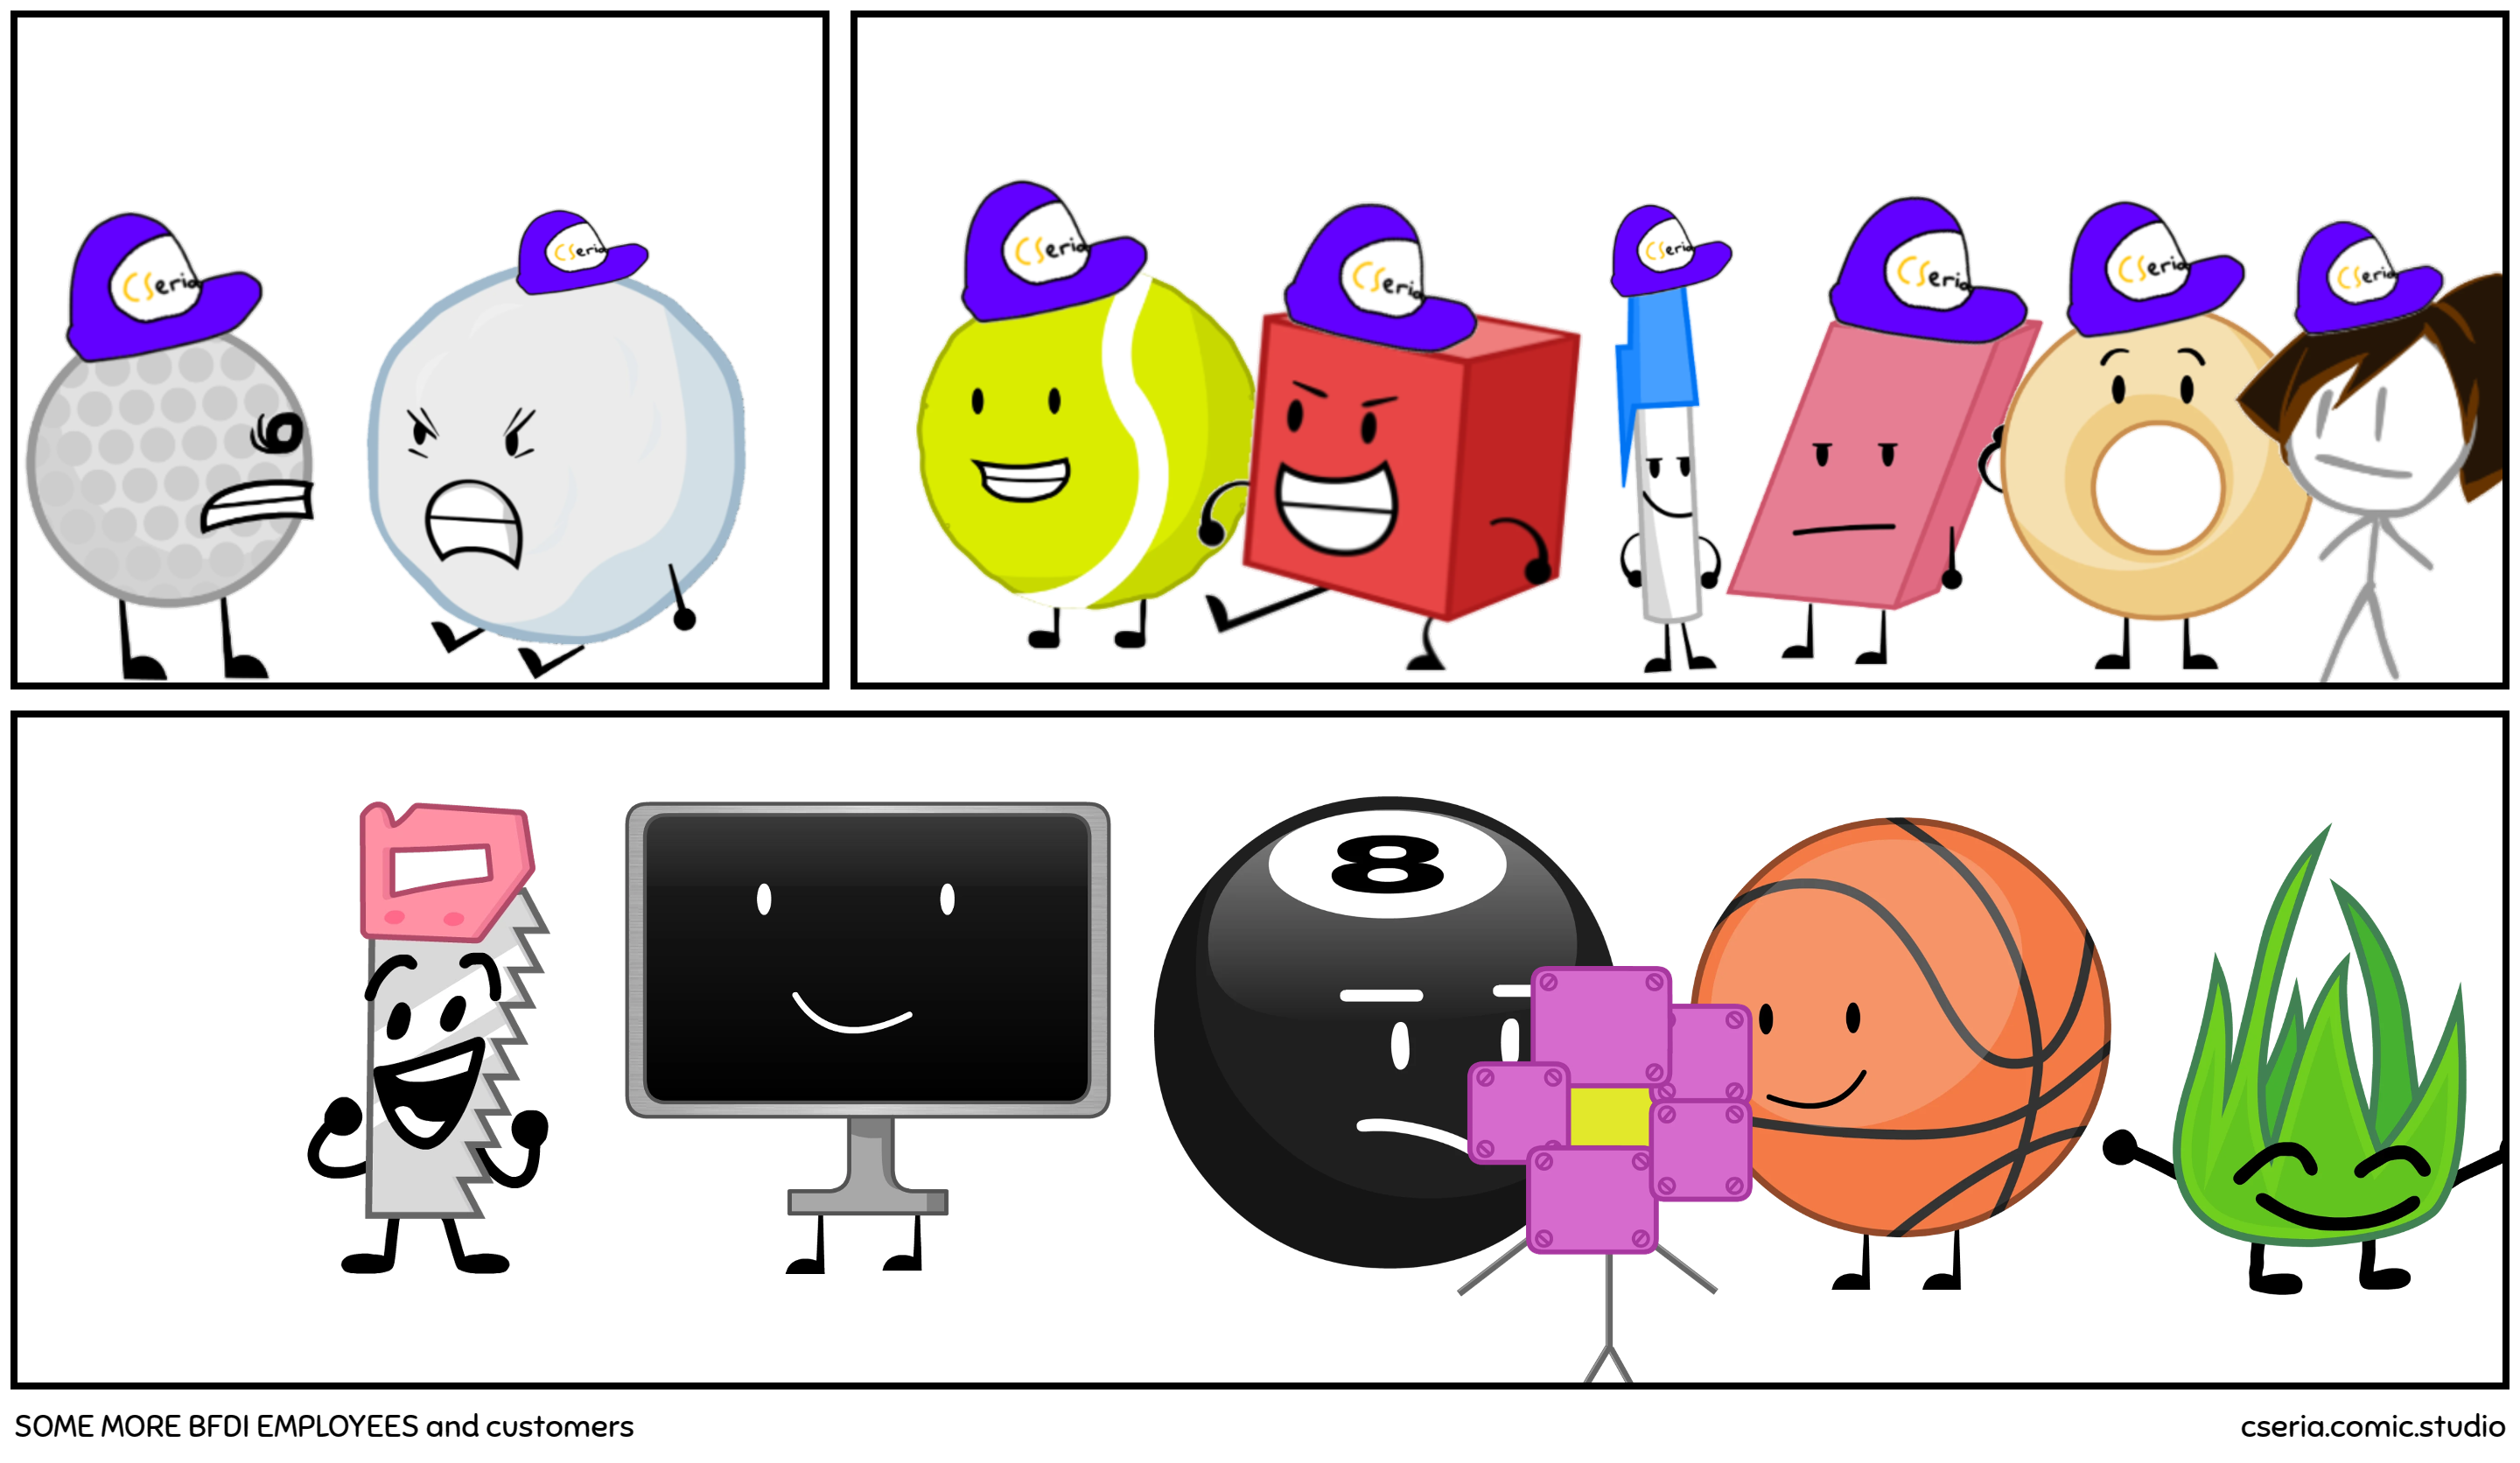 SOME MORE BFDI EMPLOYEES and customers